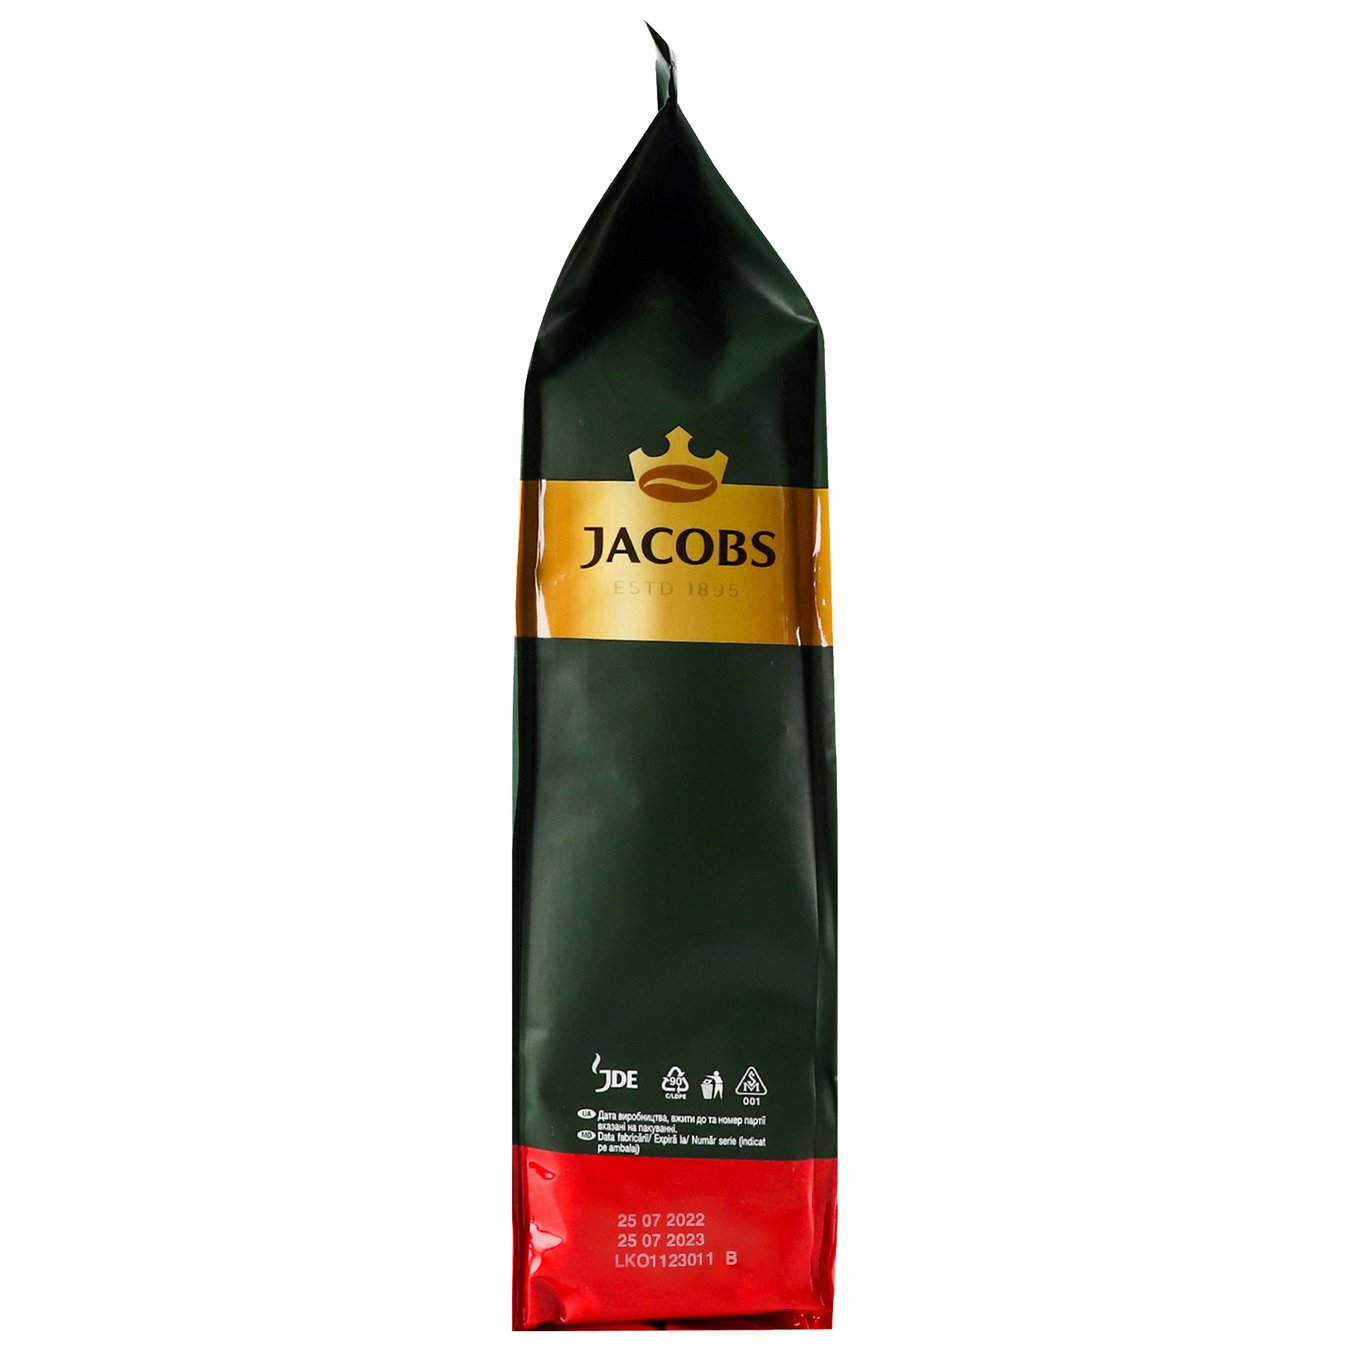 JACOBS MONARCH INTENSE natural roasted ground coffee 400g 2